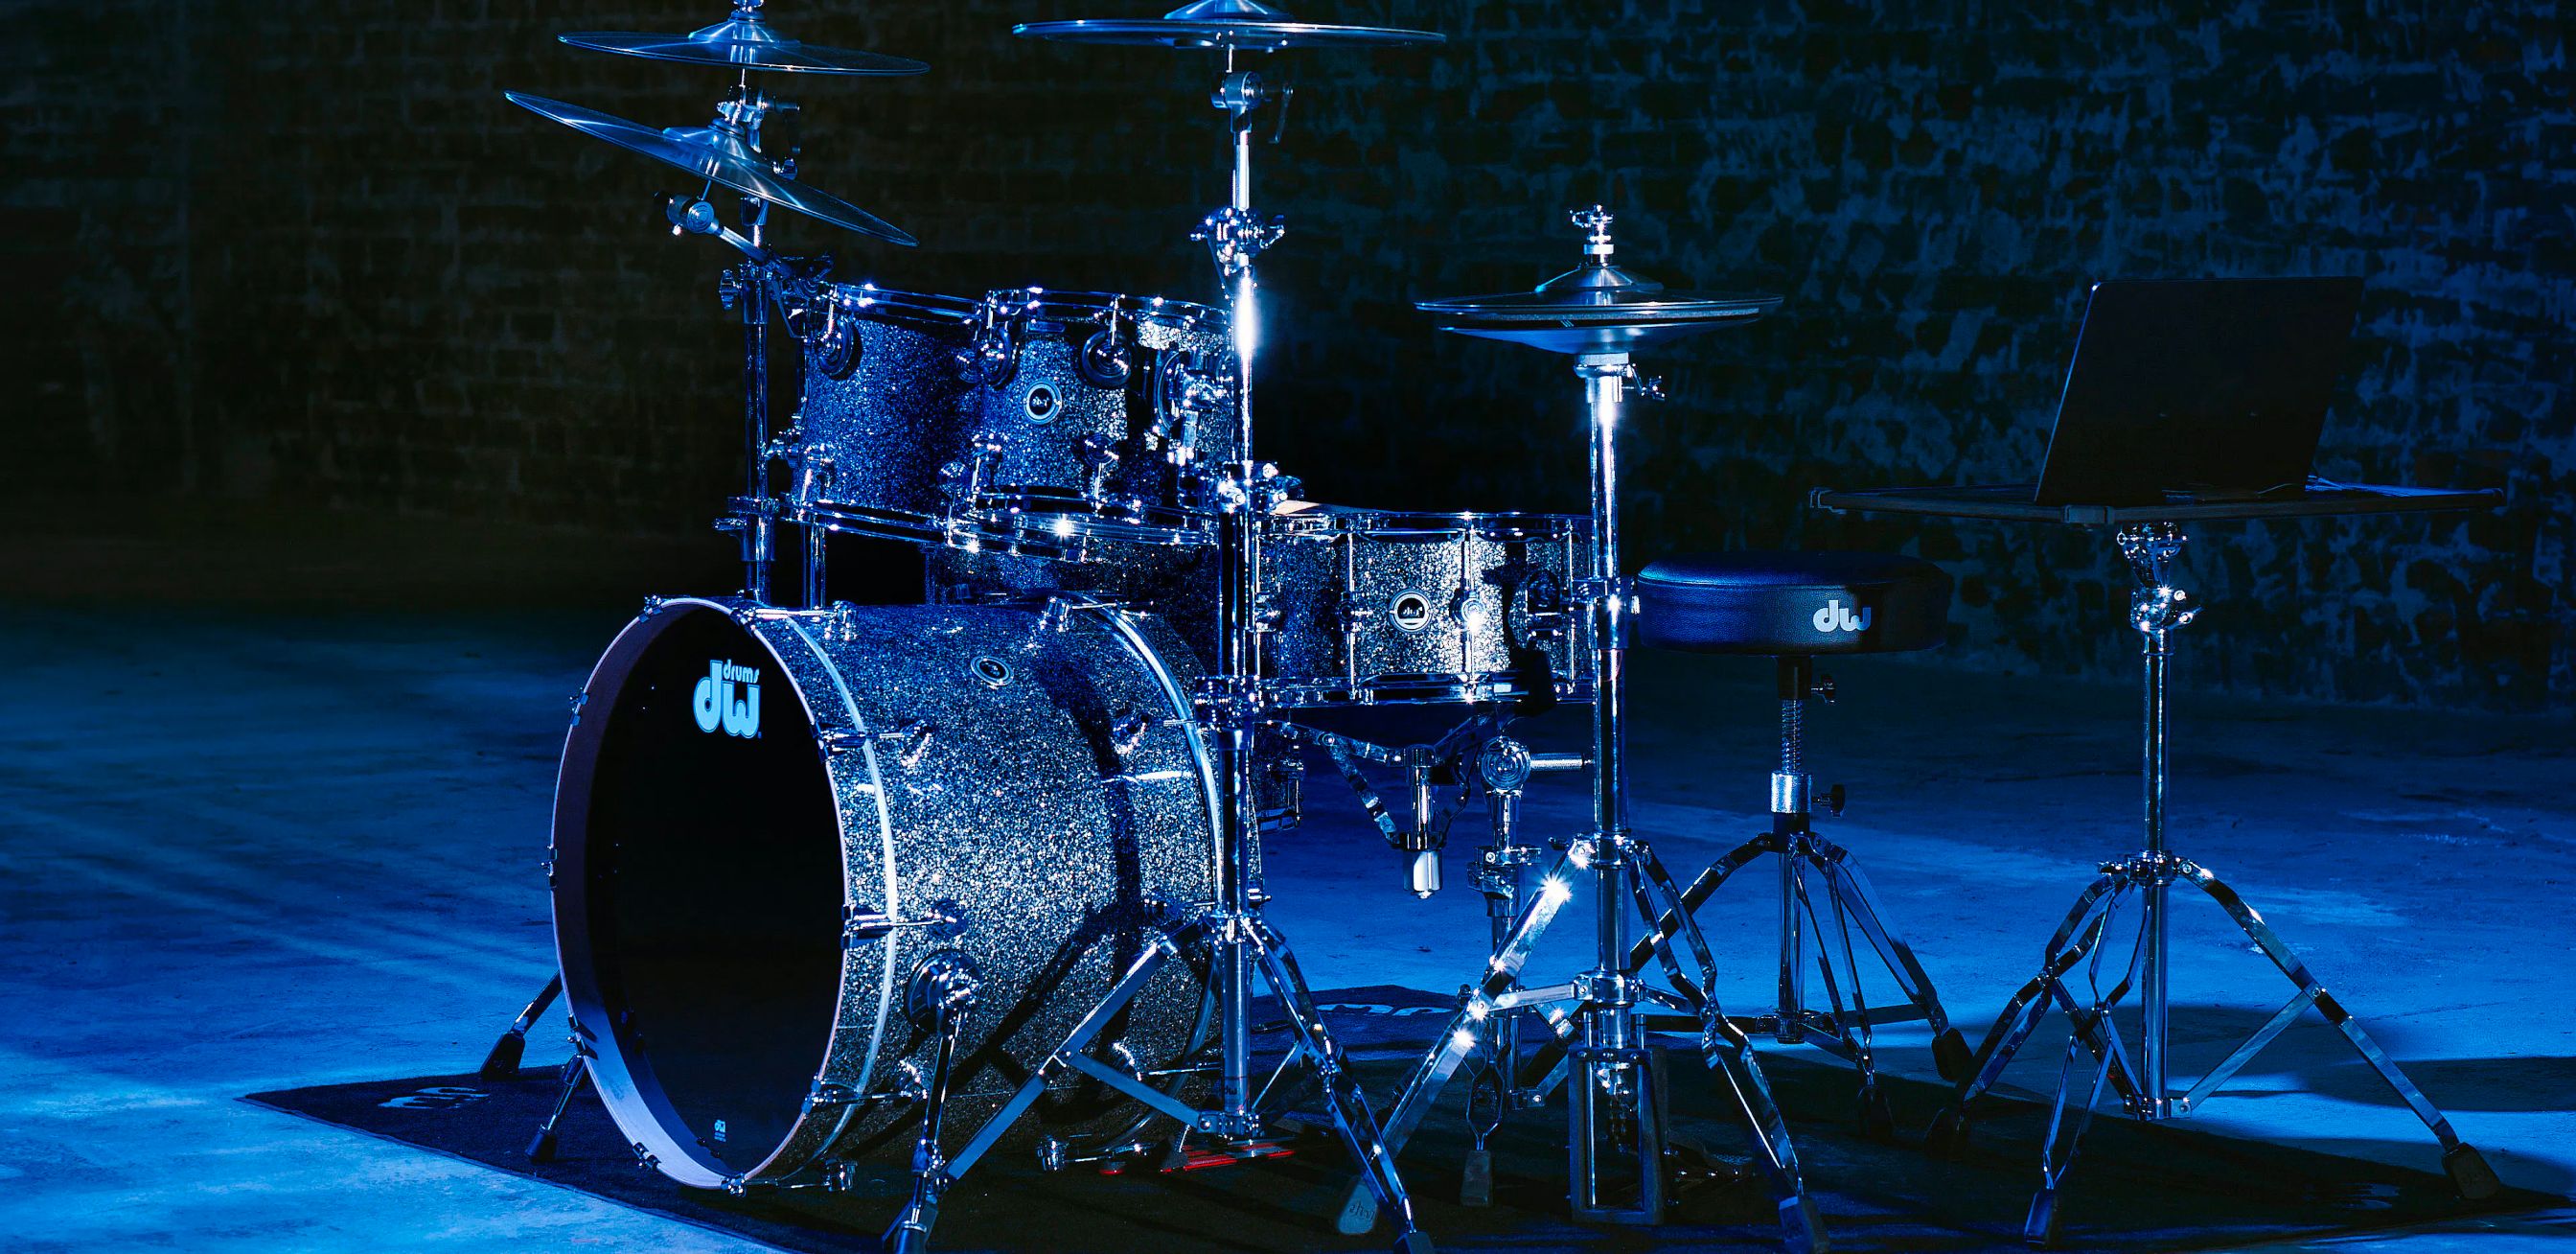 Decorative editorial element for DW Drums